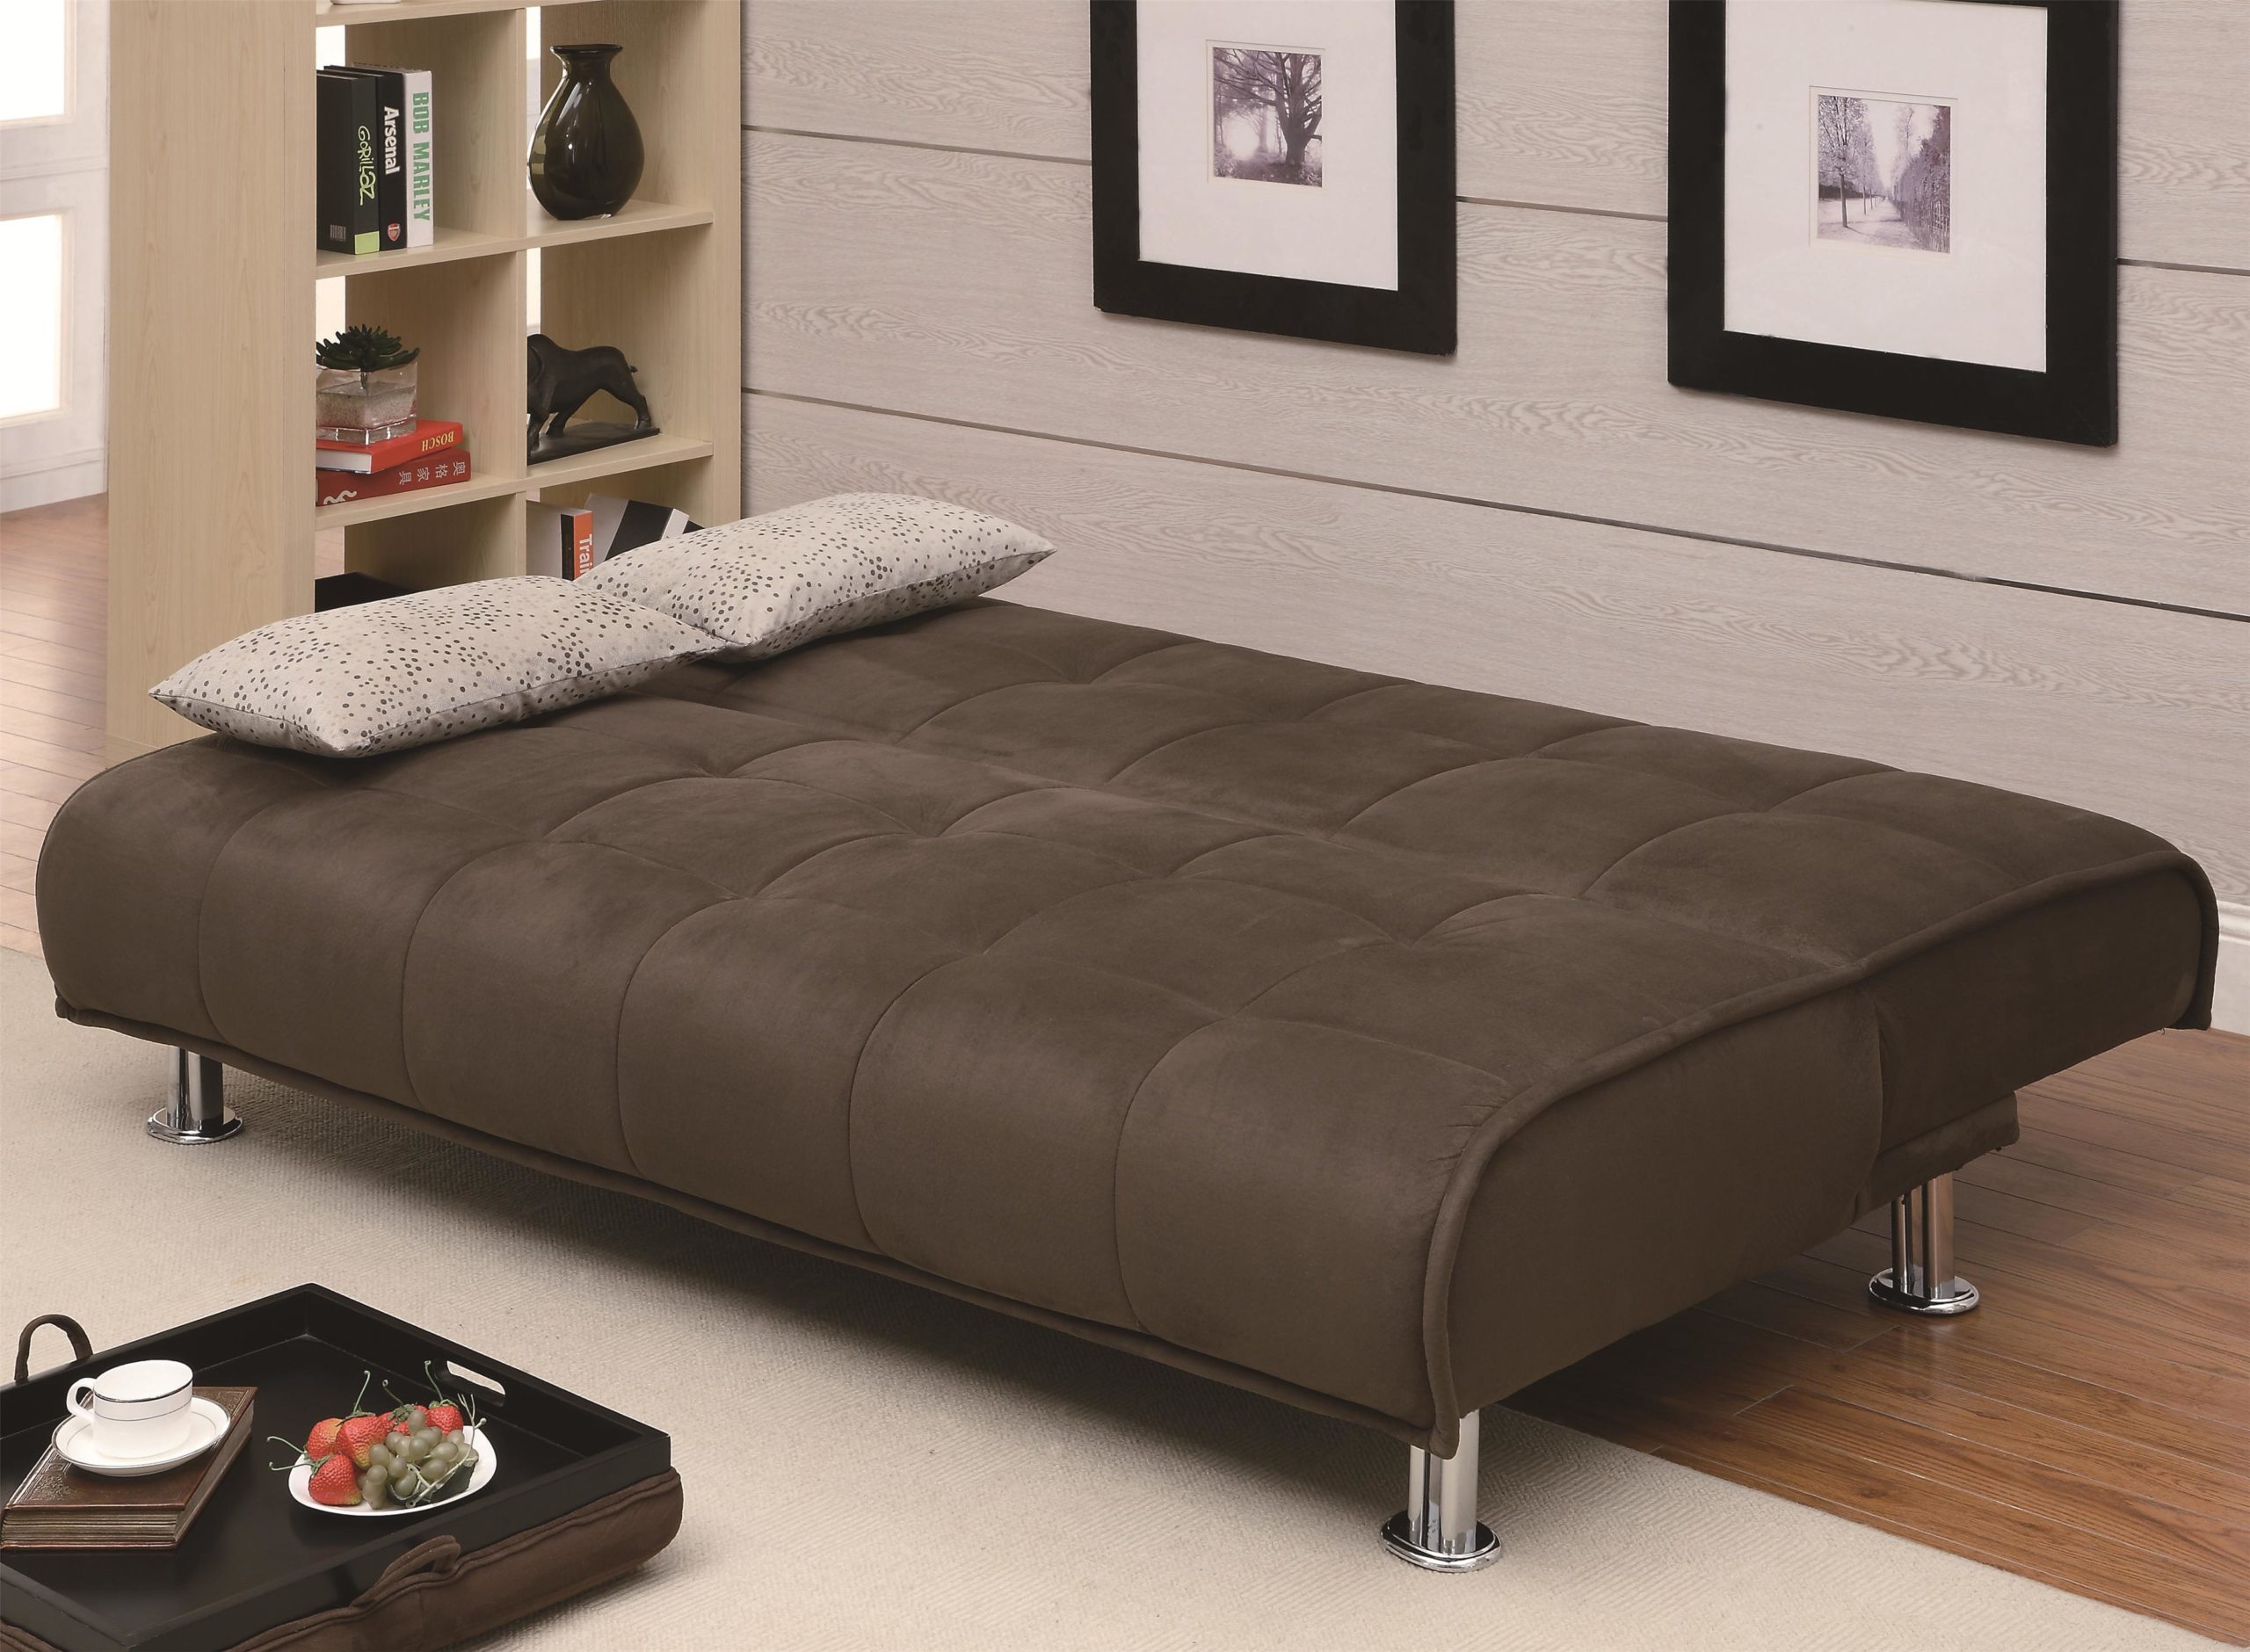 Brown Transitional Styled Sofa Sleeper Futon Bed in down position